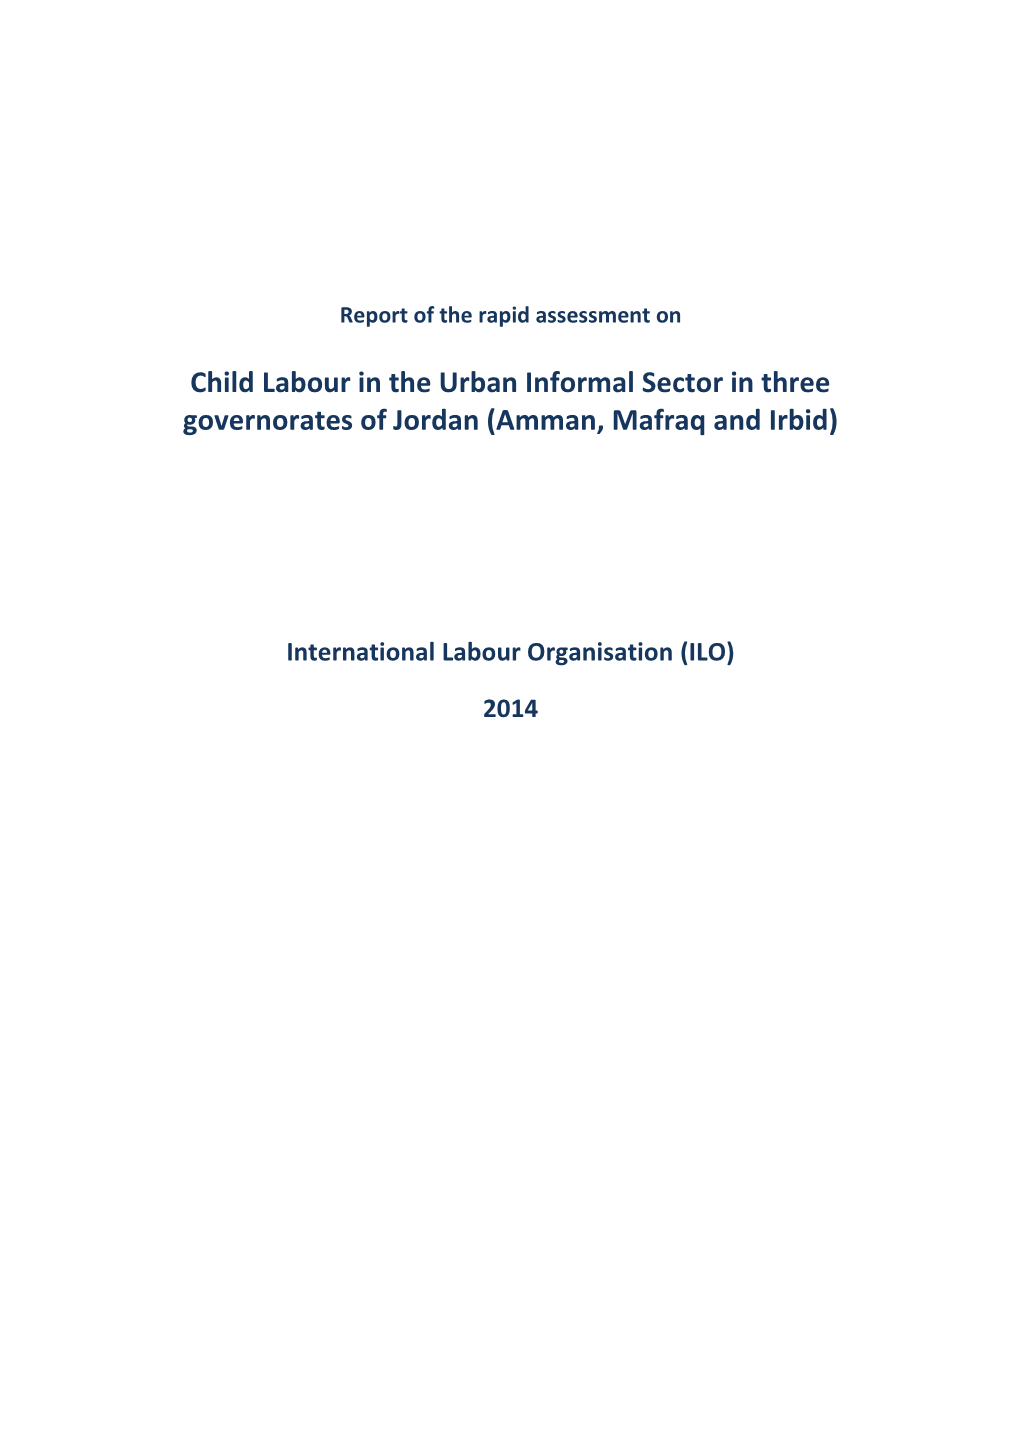 Child Labour in the Urban Informal Sector in Three Governorates of Jordan (Amman, Mafraq and Irbid)